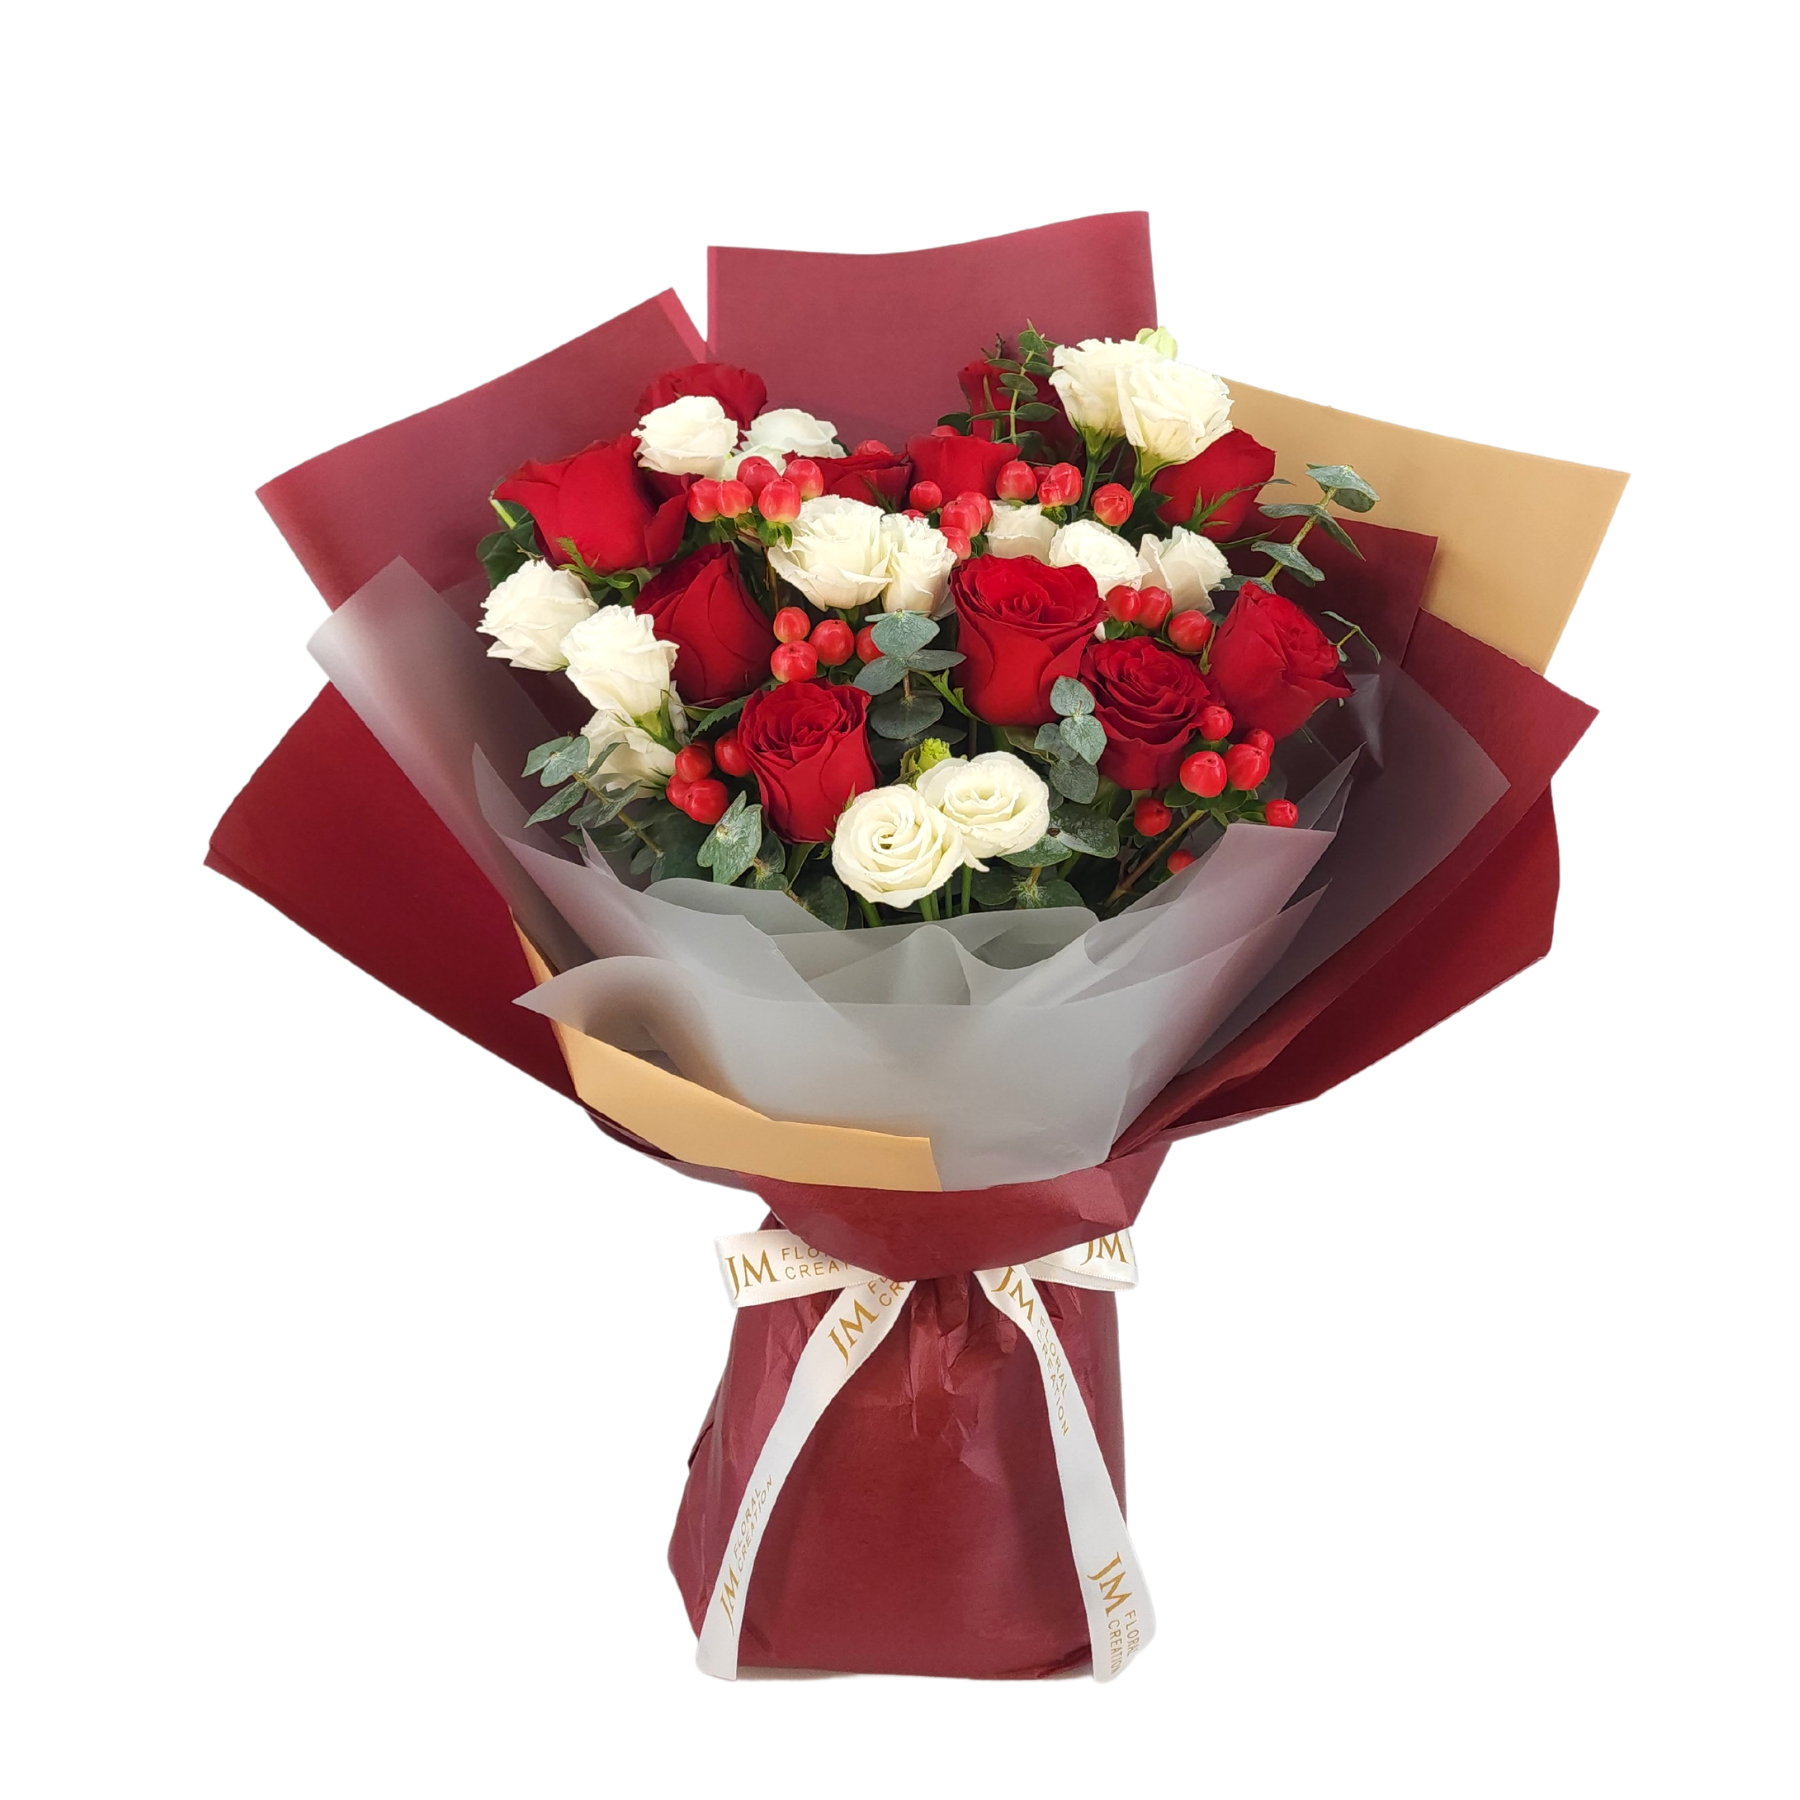 Valentine's Day Dozen White Rose Bouquet With Box & Wine – Valentine's Day  Gifts – New Jersey Blooms - Blooms New Jersey